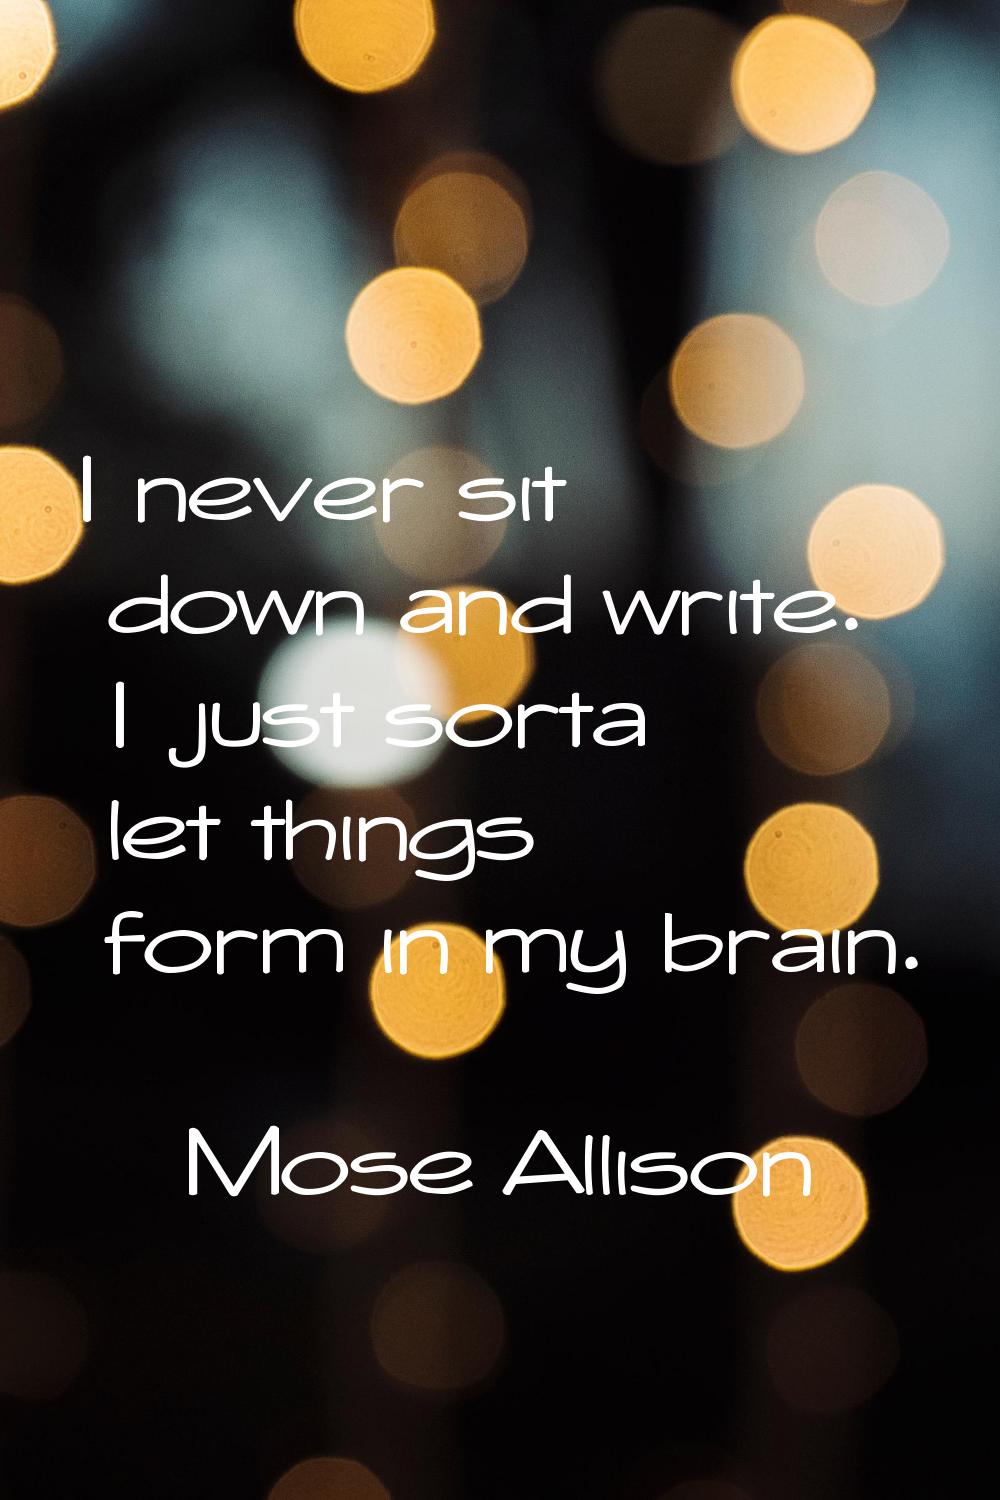 I never sit down and write. I just sorta let things form in my brain.